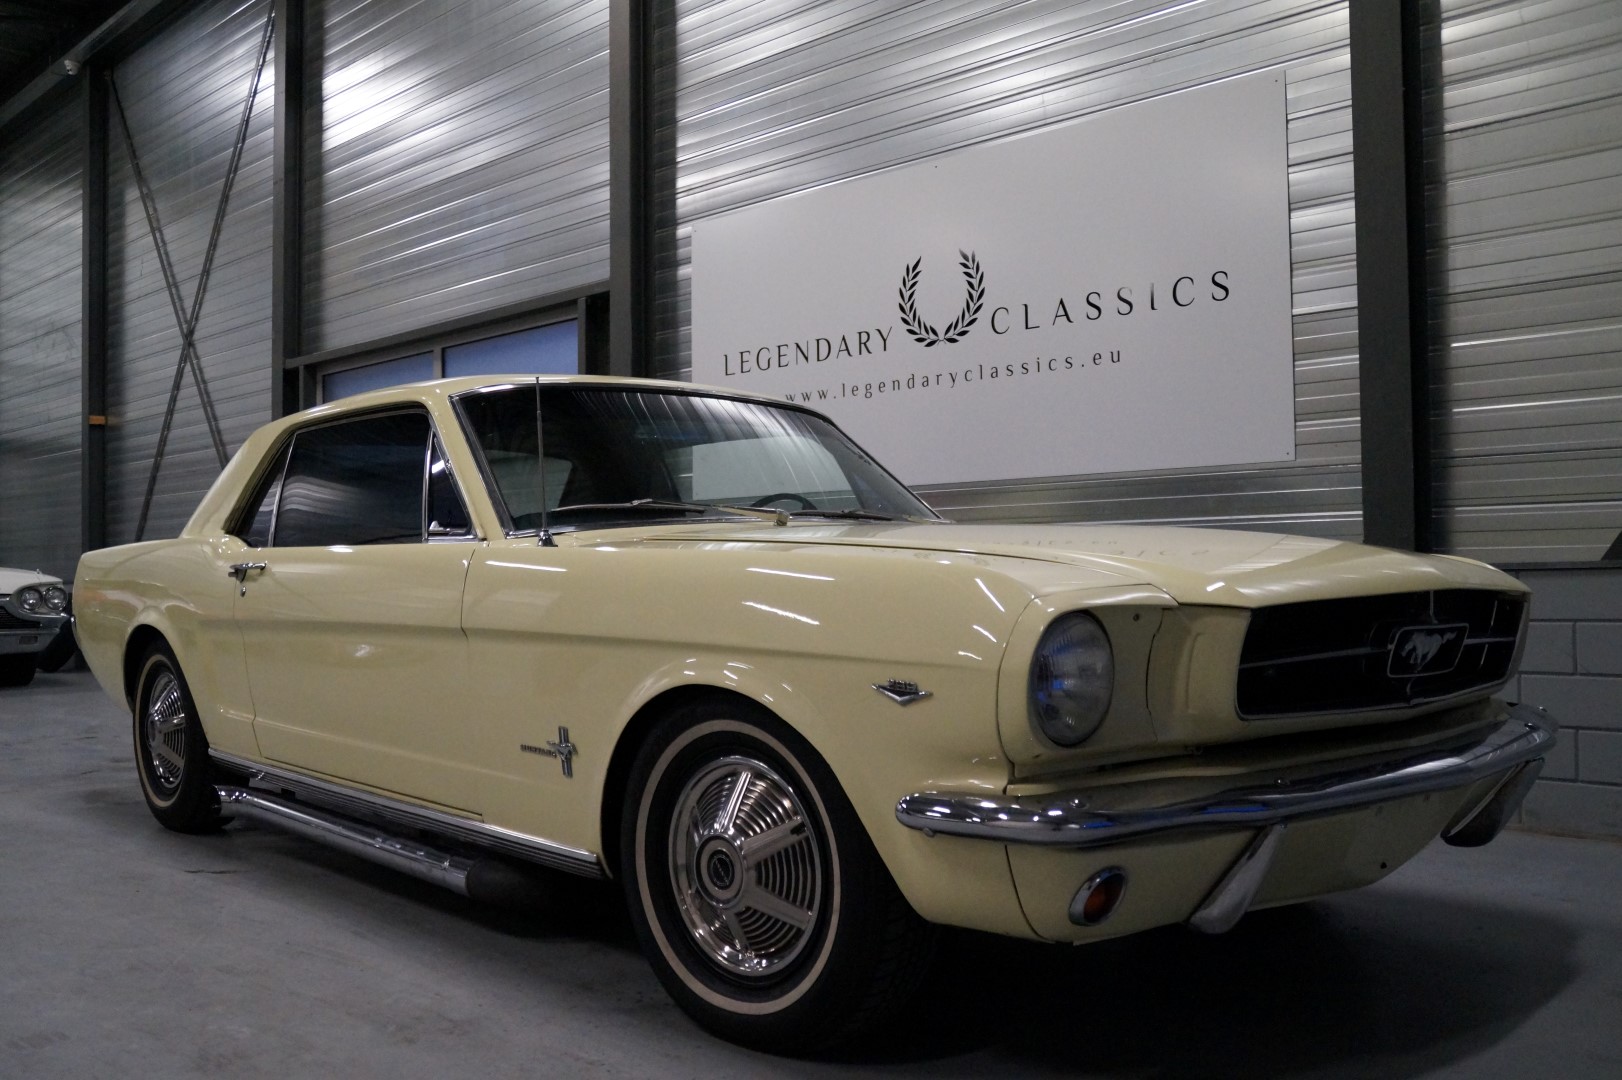 Buy this Ford Mustang   at Legendary Classics